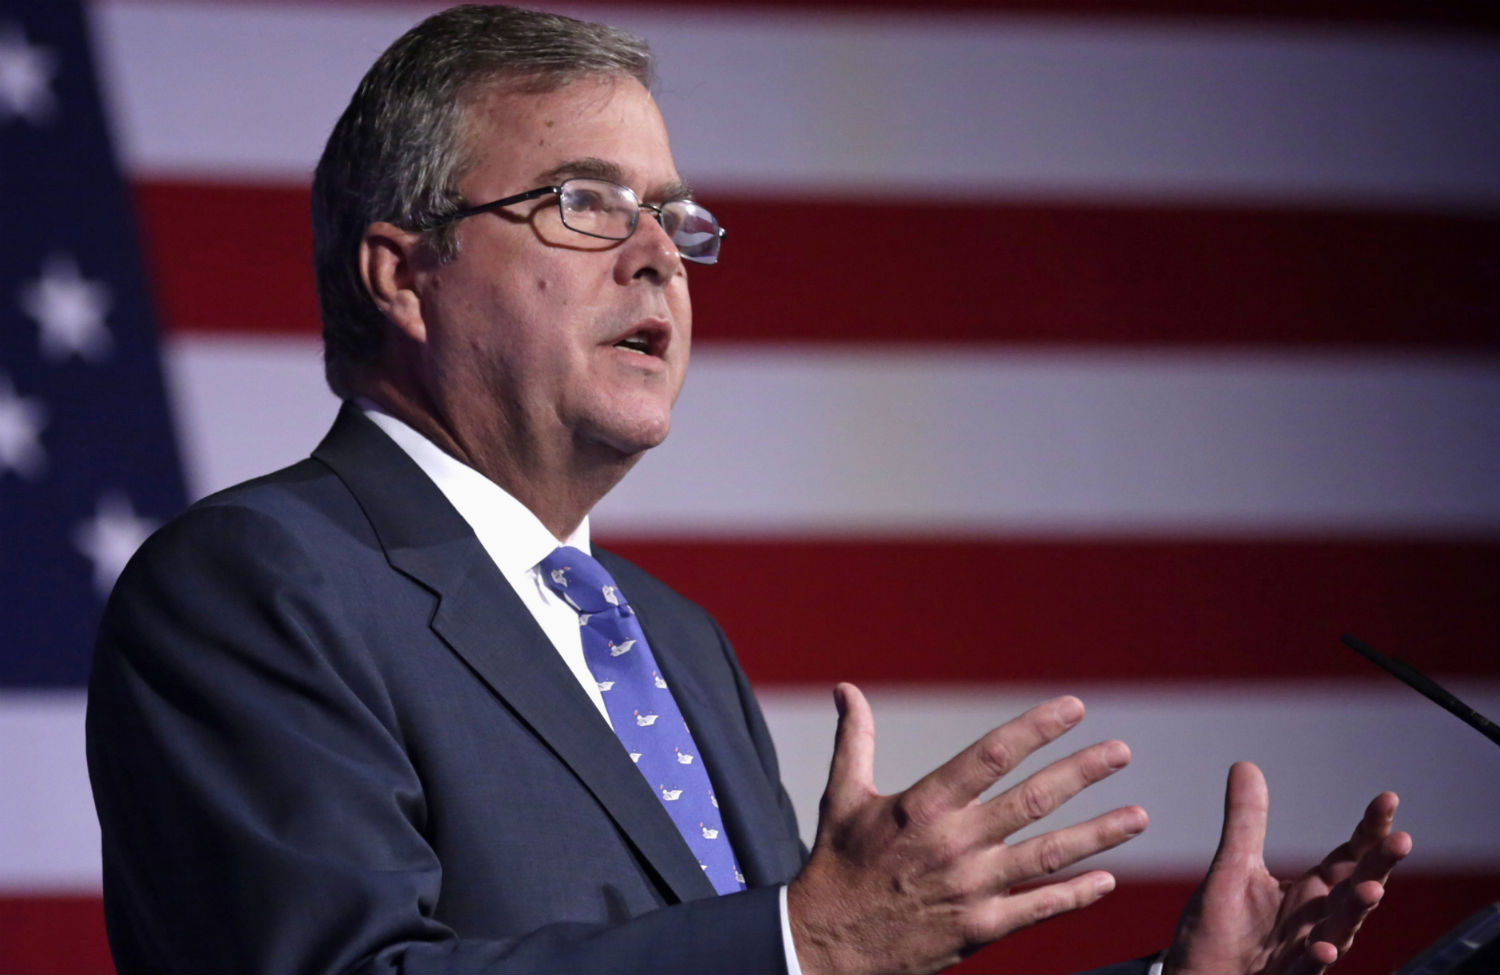 Will Jeb Bush Follow in His Brother’s Footsteps on Foreign Policy?